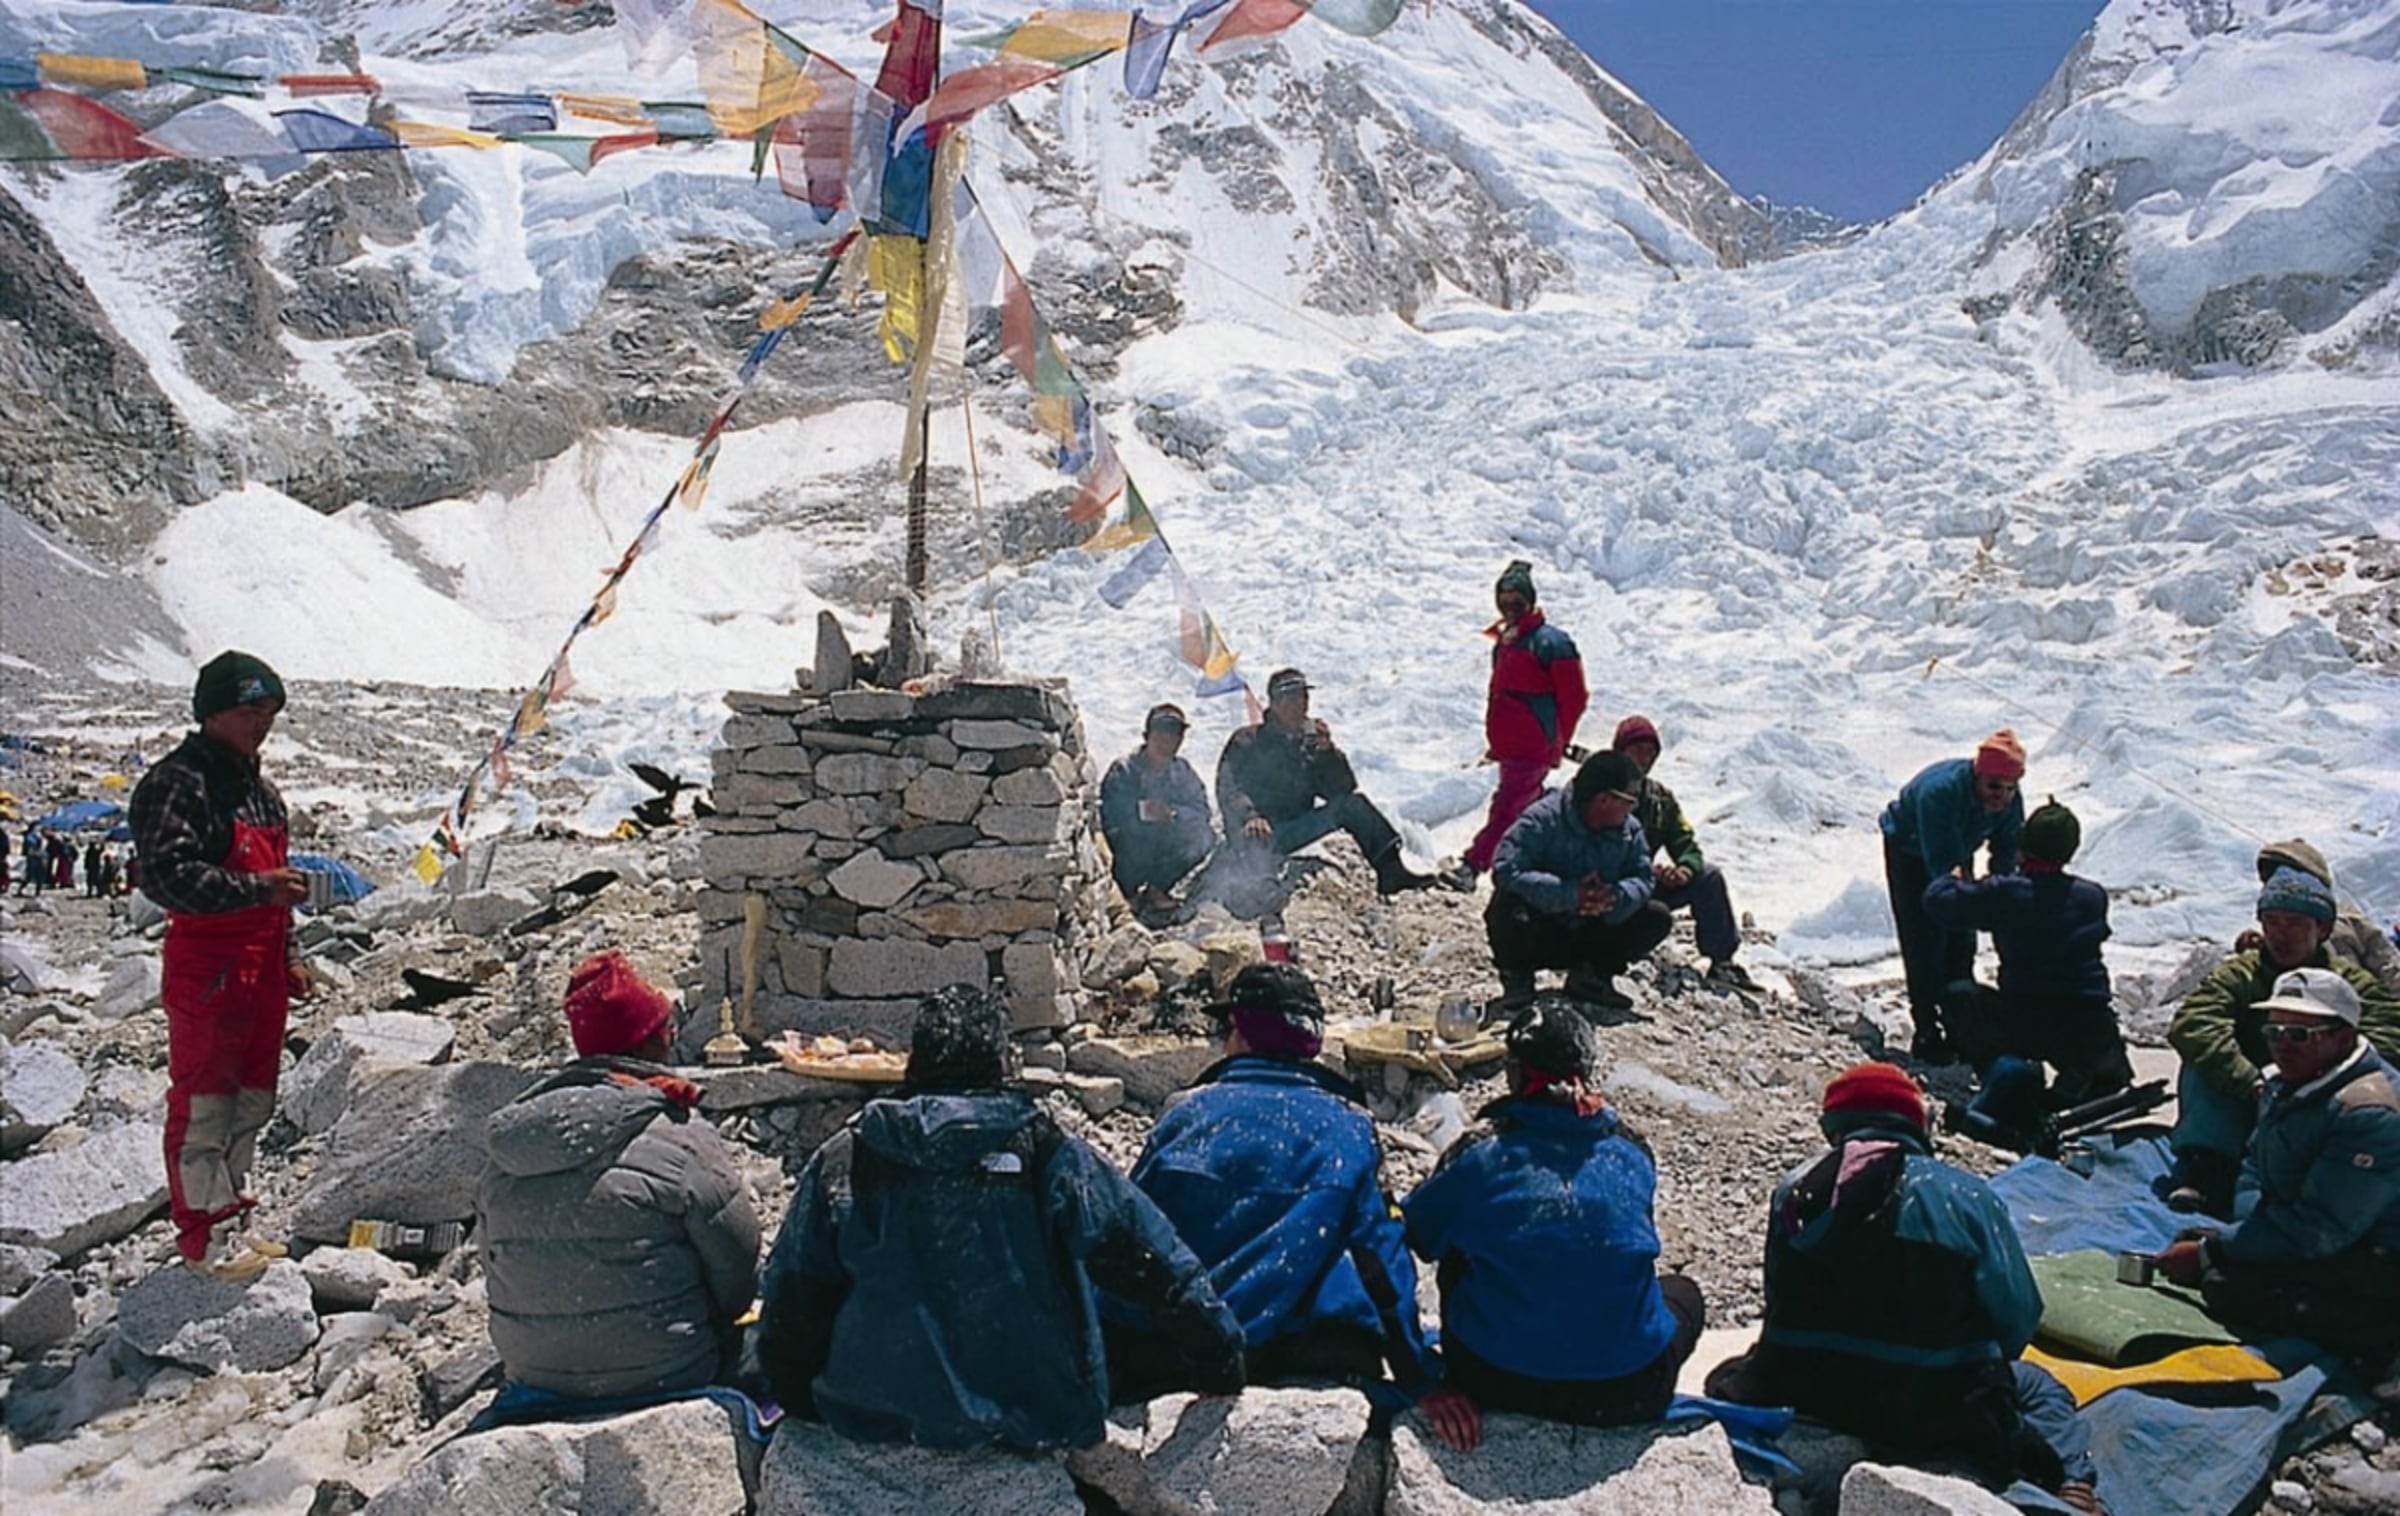 Sherpas attack climbers on Everest – what’s really going on? | Cathy O